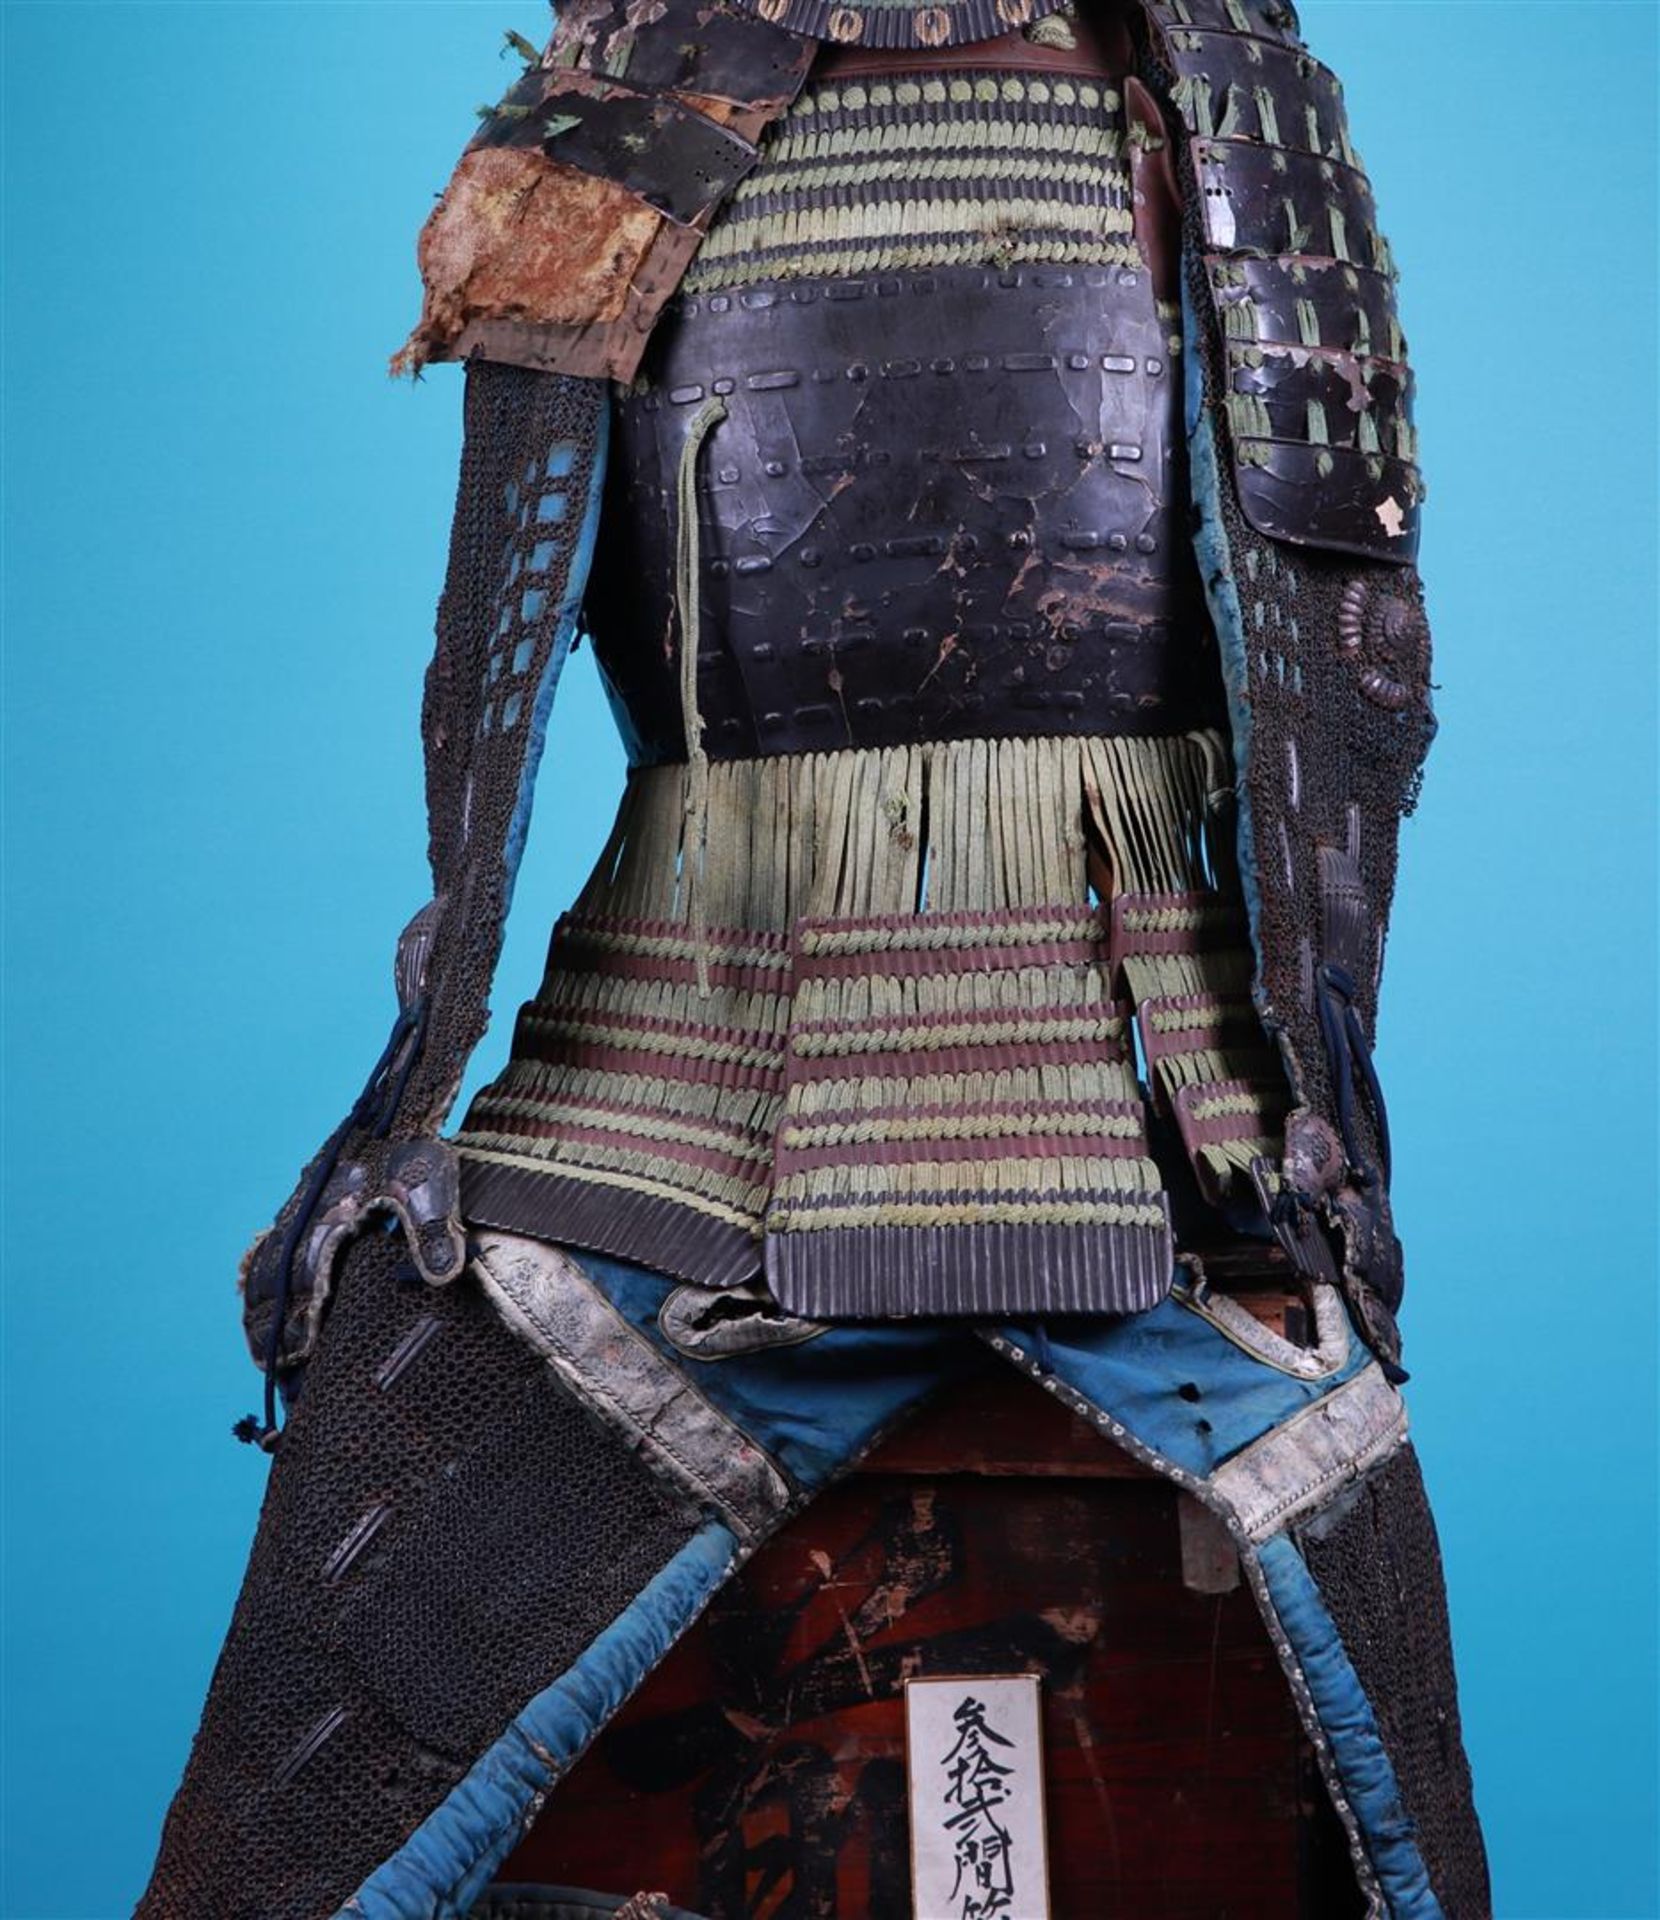 An antique Edo period, black lacquered Japanese armor (yoroi) laced with navy blue and green cords a - Image 7 of 8